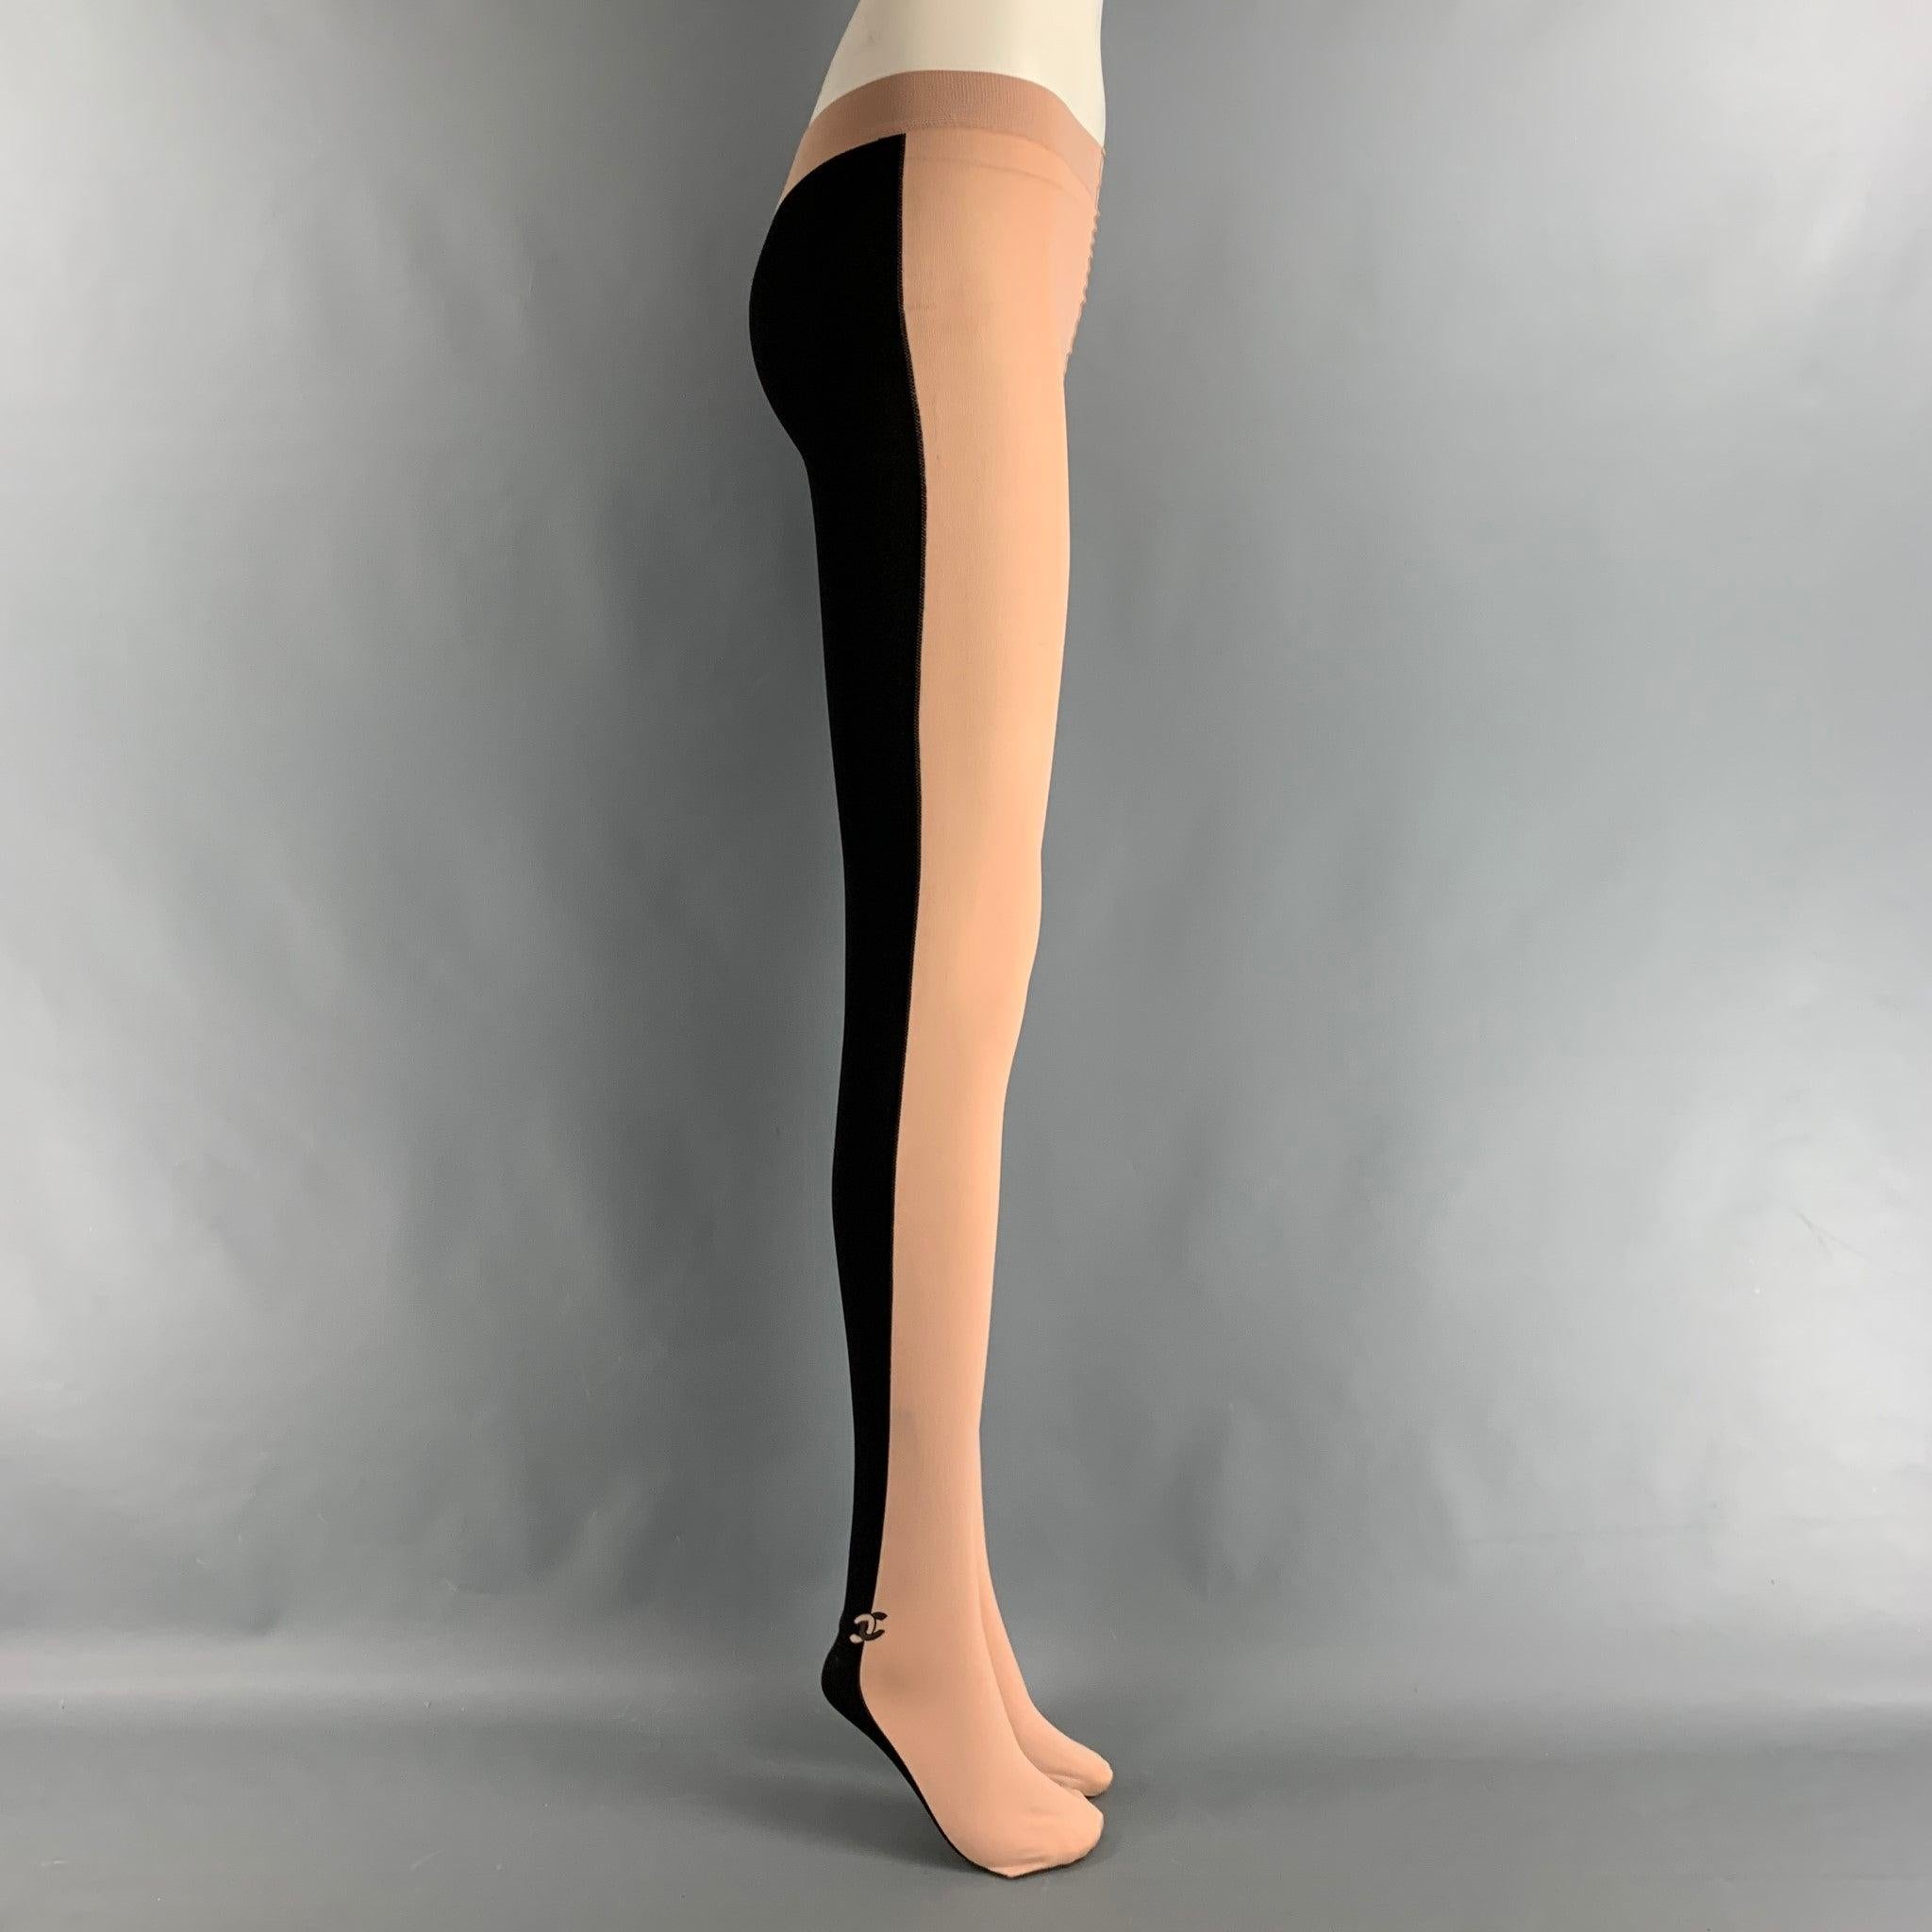 CHANEL leggings comes in a black and nude nylon knit material features a CC logo detail at ankle, stretch wait and leg, and features a feet design. Made in Italy. Excellent Pre-Owned Condition. 

Marked:   M 

Measurements: 
  Waist: 20 inches